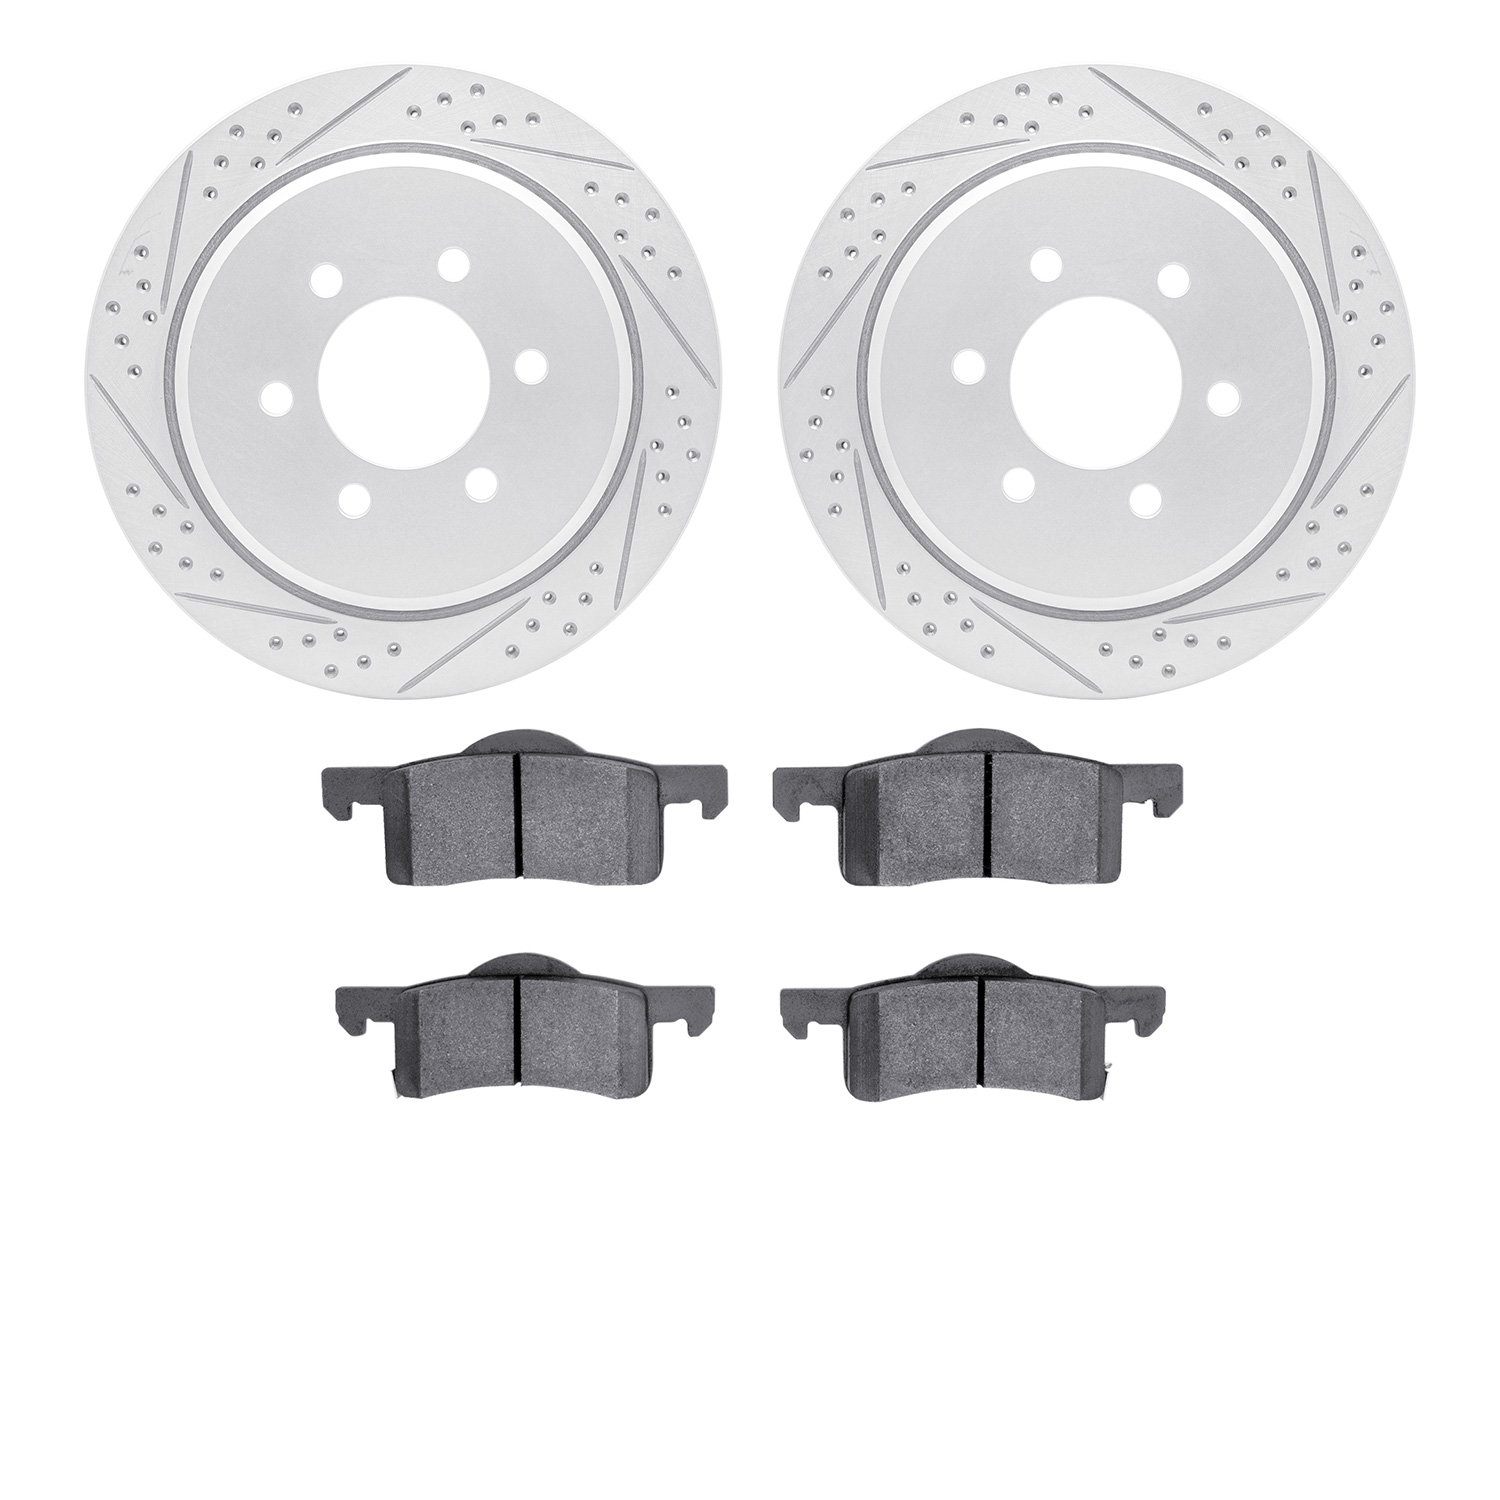 2202-99130 Geoperformance Drilled/Slotted Rotors w/Heavy-Duty Pads Kit, 2002-2006 Ford/Lincoln/Mercury/Mazda, Position: Rear